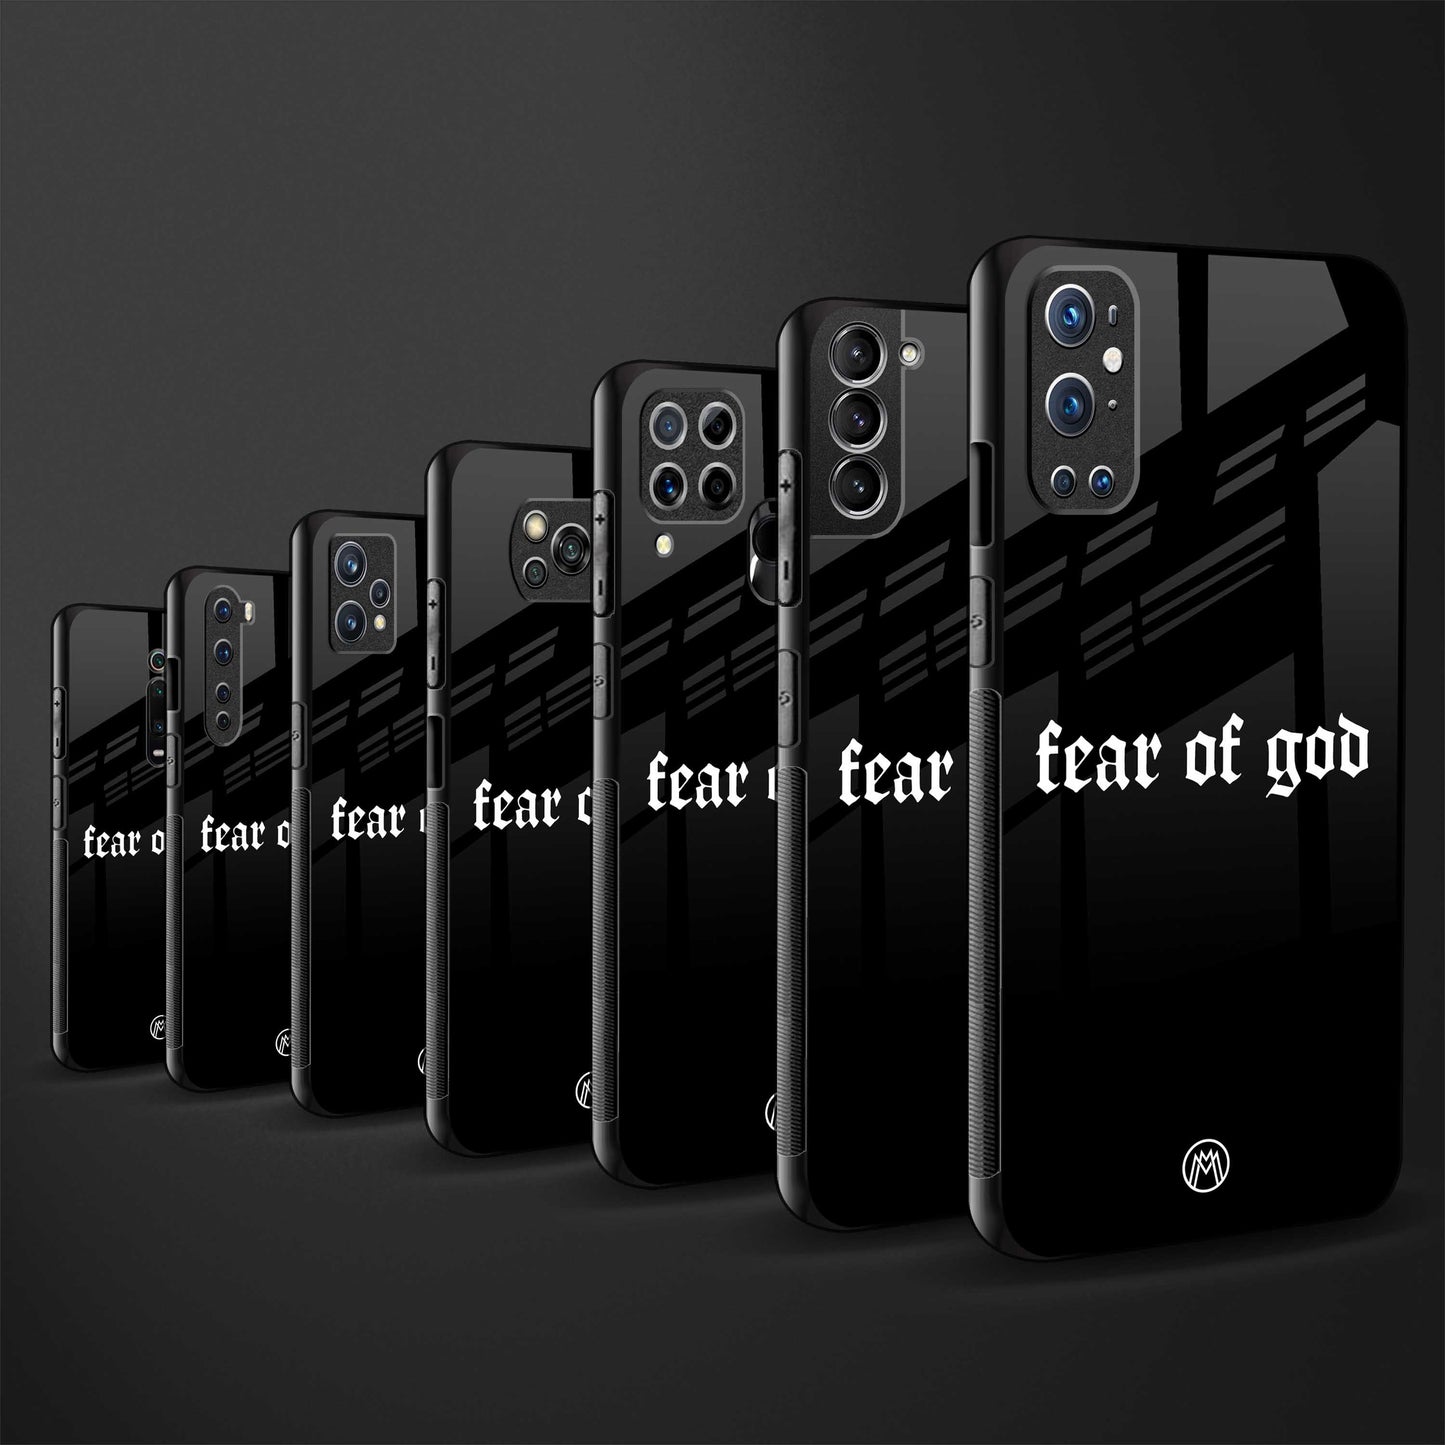 fear of god phone cover for realme 7 pro